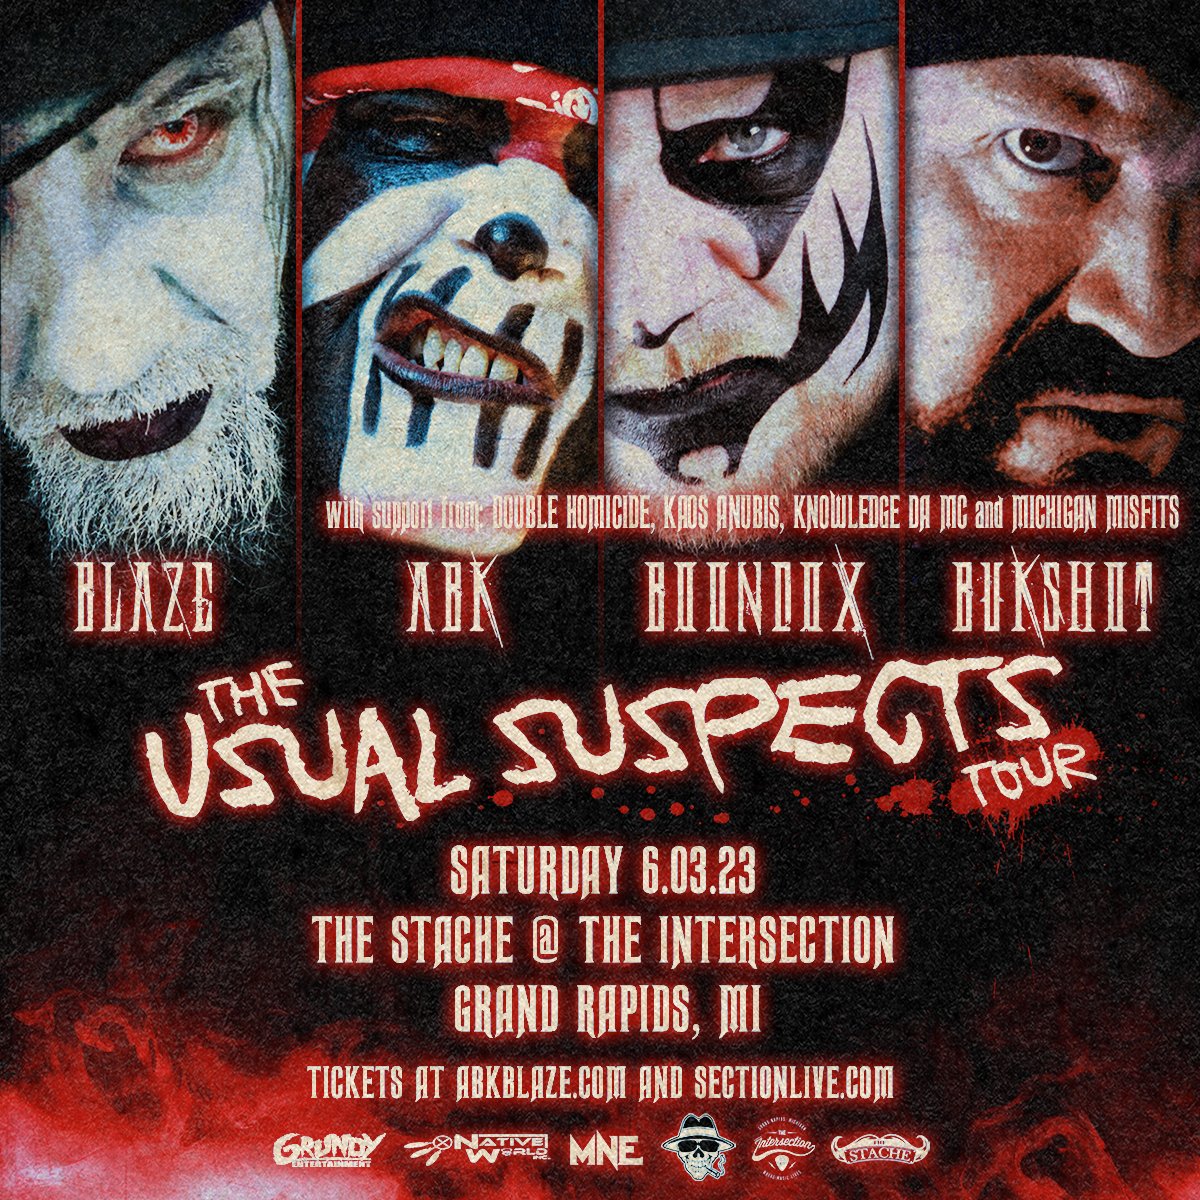 This Week at SectionLive 🎶 @BlazeYaDead1 @Abkwarrior @TurnCoat_Dirty @Bukshizzle The Usual Suspects Tour on Sat 6/3 with Double Homicide, Kaos Anubis, Knowledge Da MC, and Michigan Misfits 🎫 bit.ly/BYDH-ABK